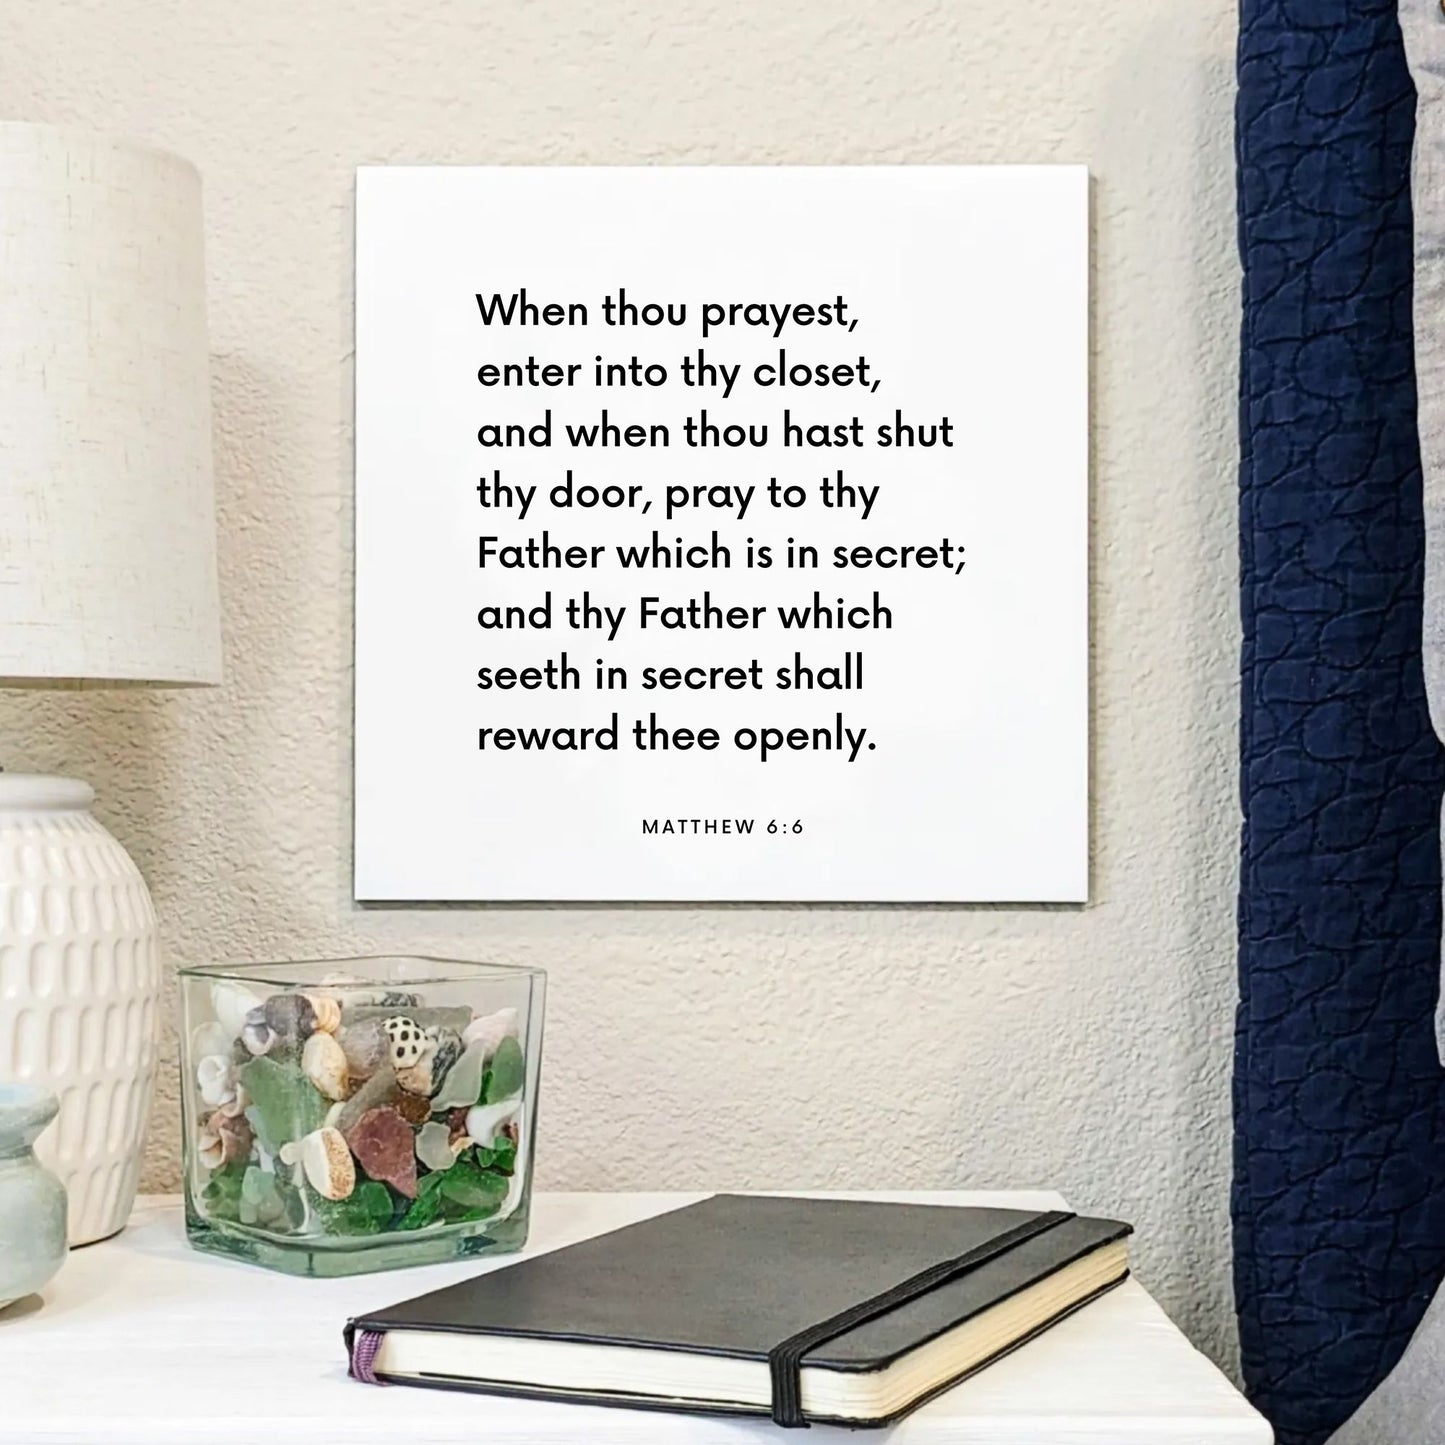 Bedside mouting of the scripture tile for Matthew 6:6 - "When thou prayest, enter into thy closet"